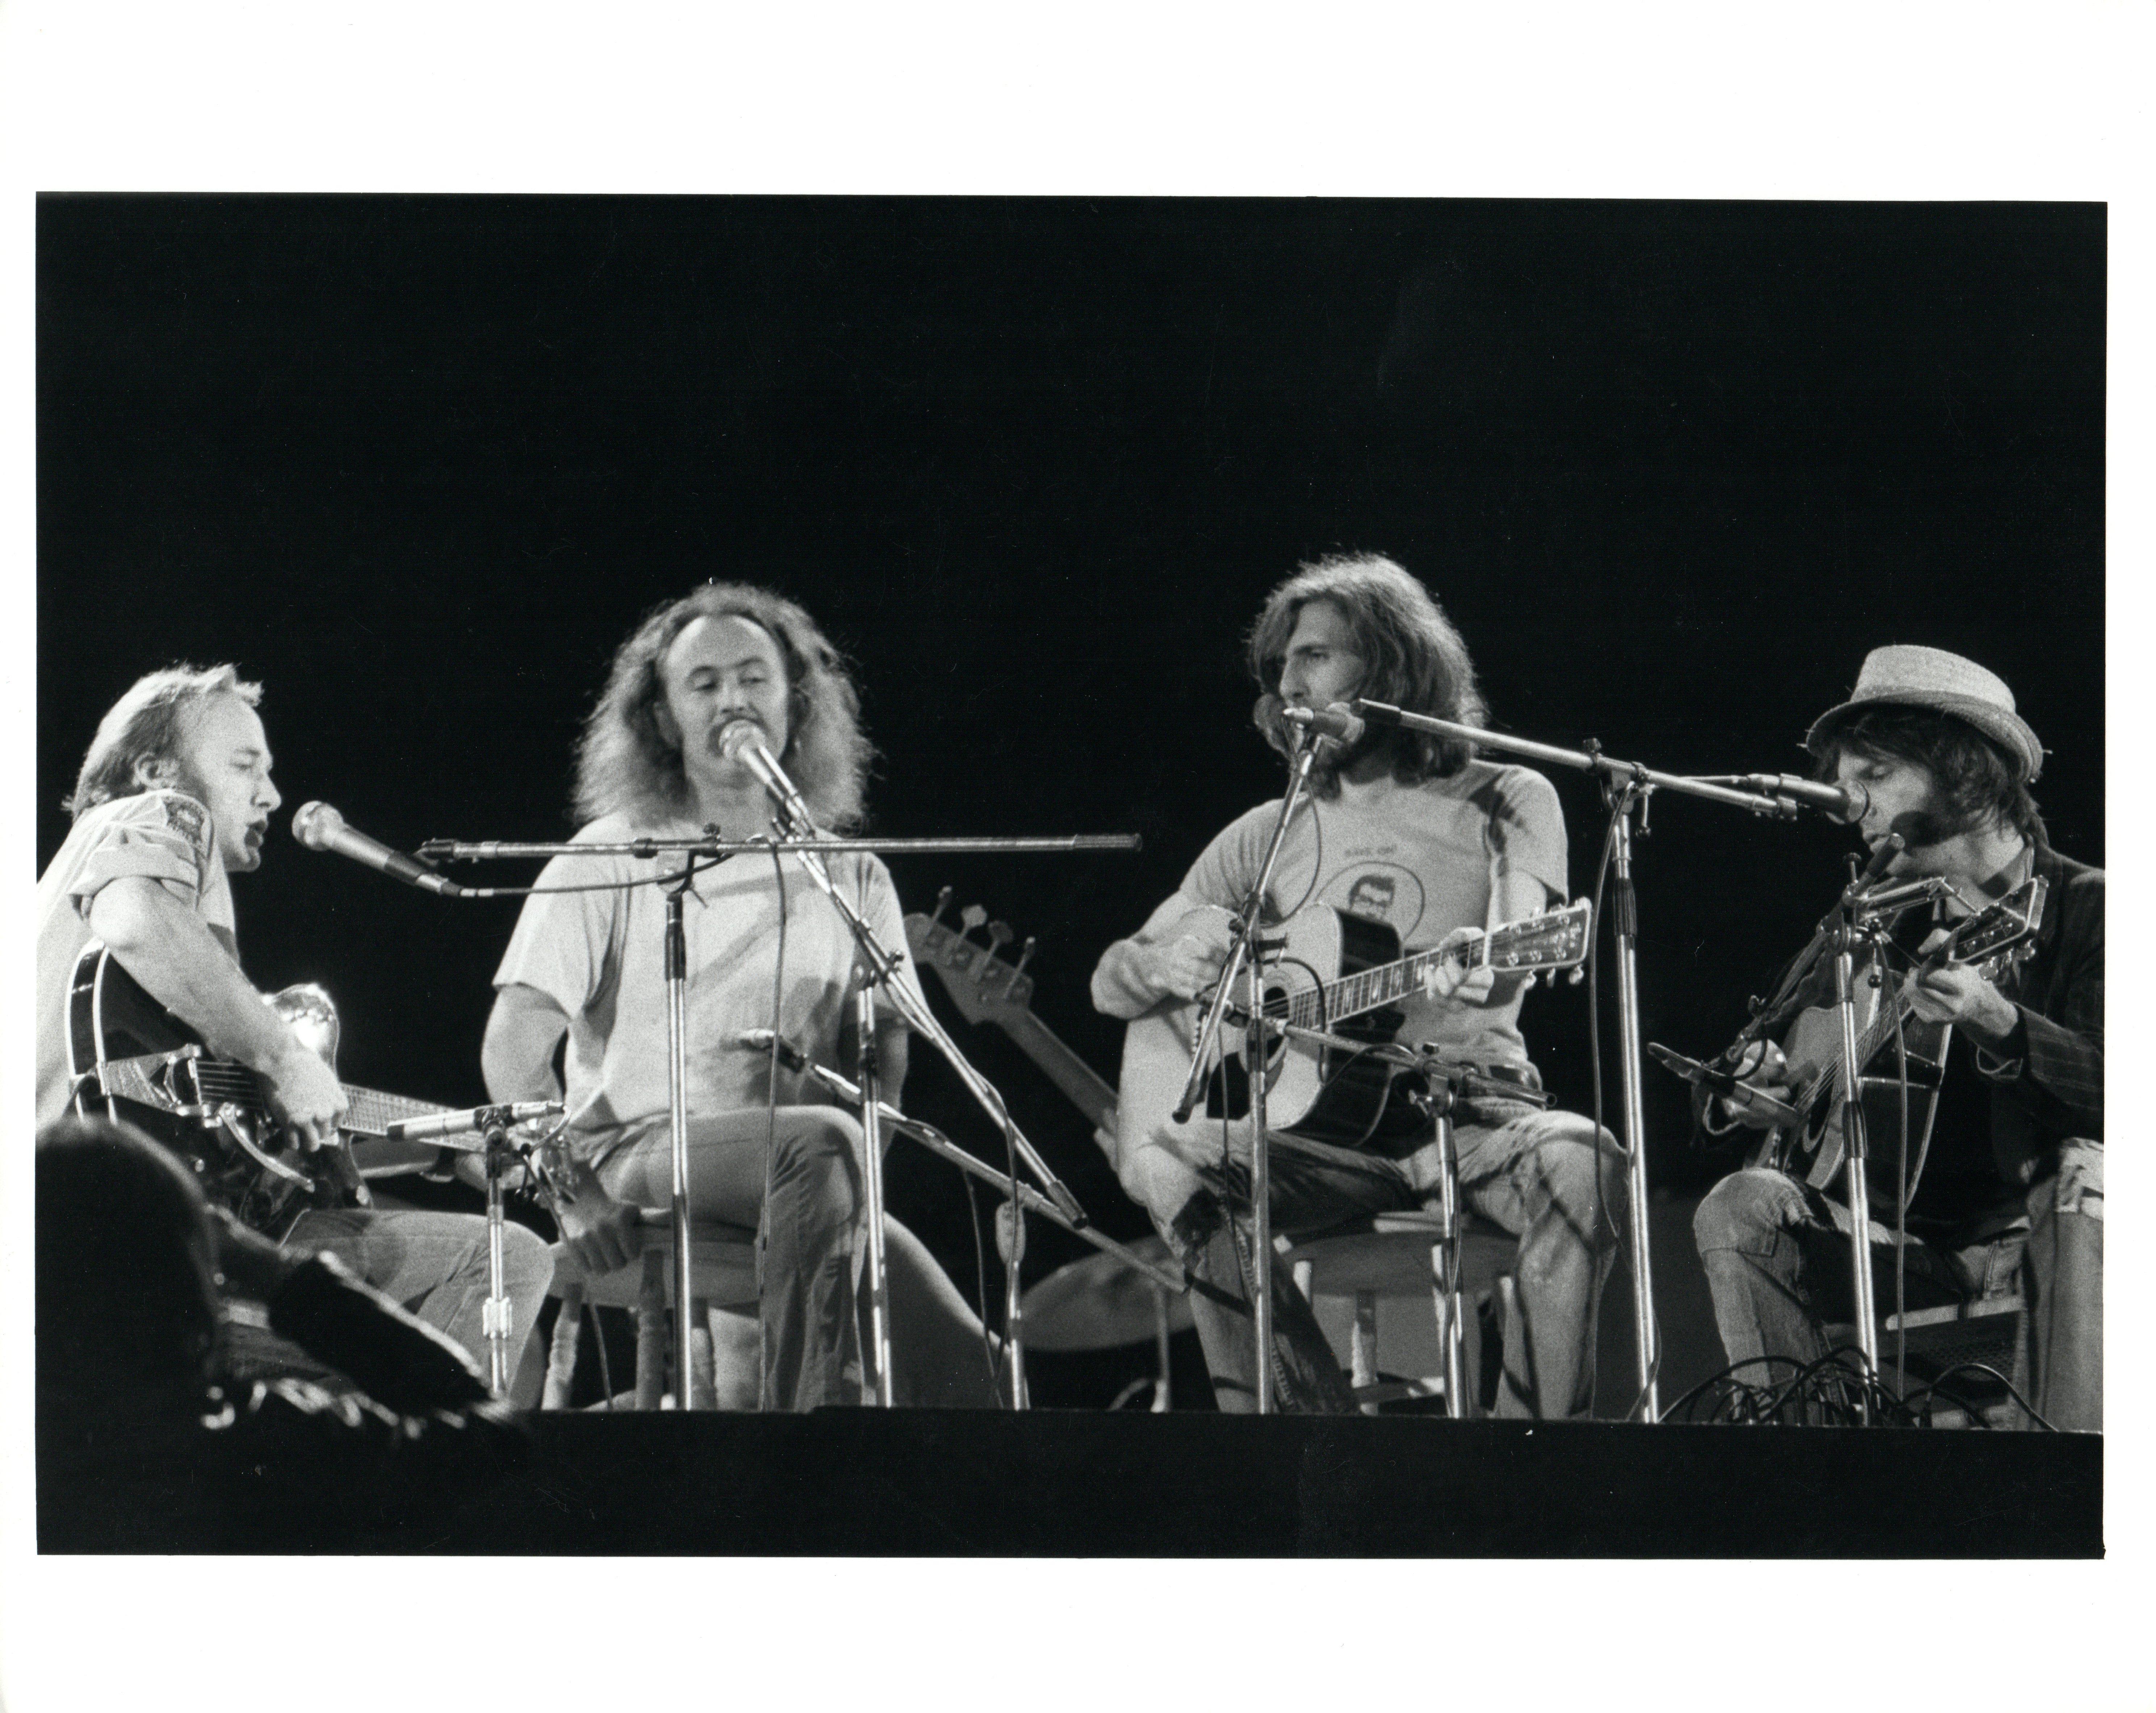 Unknown Black and White Photograph - Crosby, Stills, and Nash on Stage Vintage Original Photograph